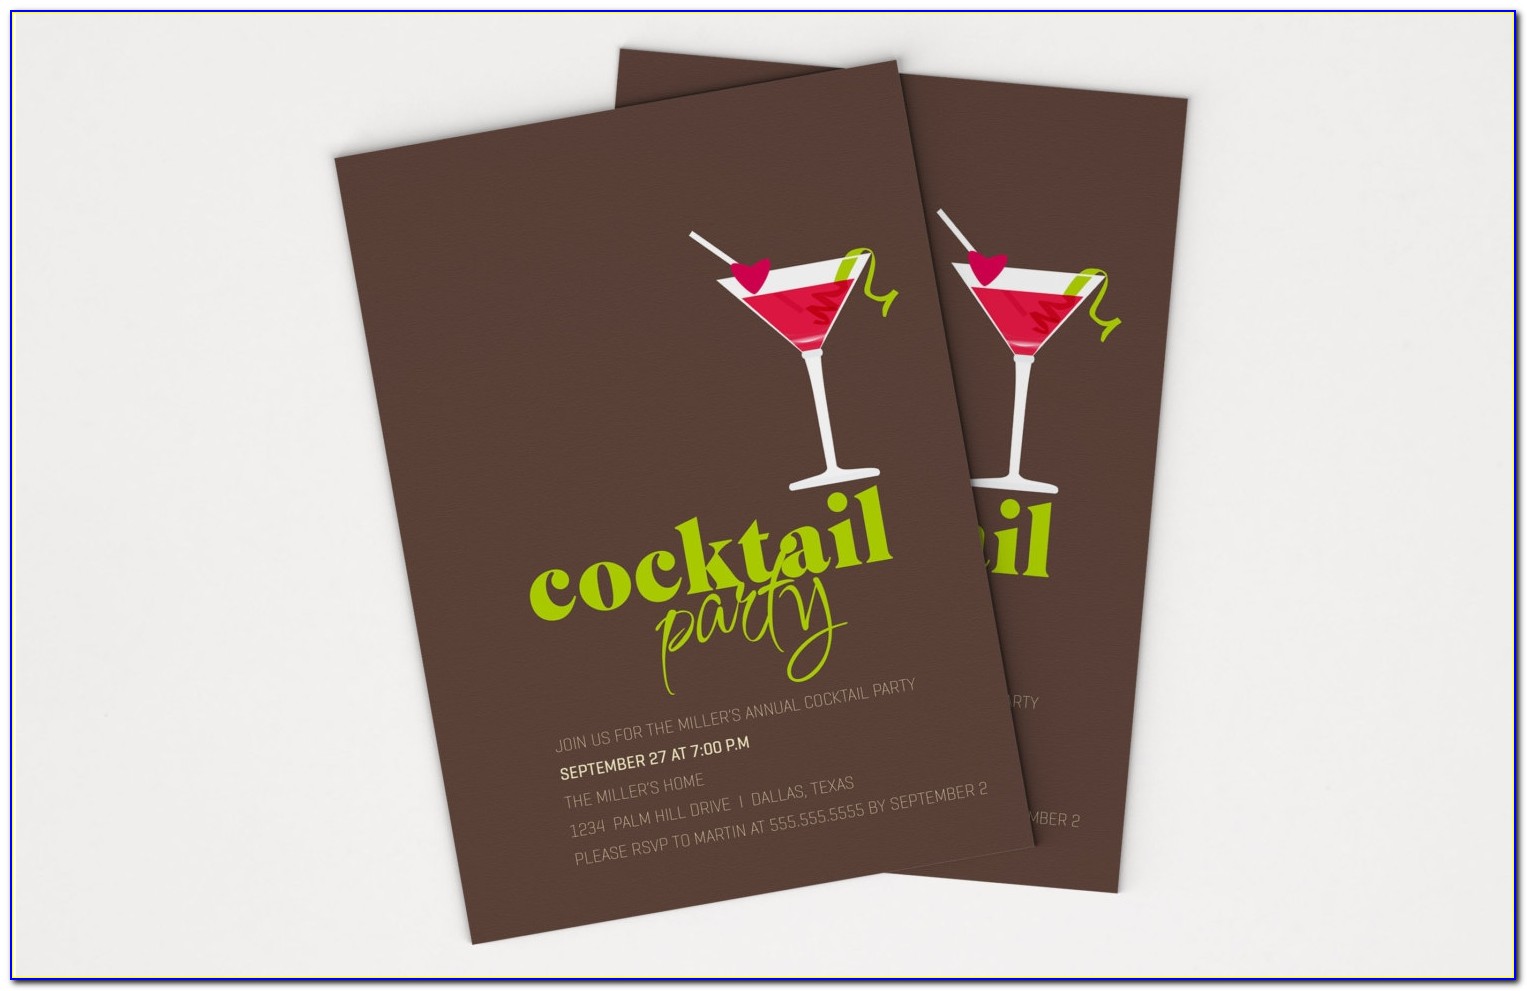 Cocktail Party Invitation Wording